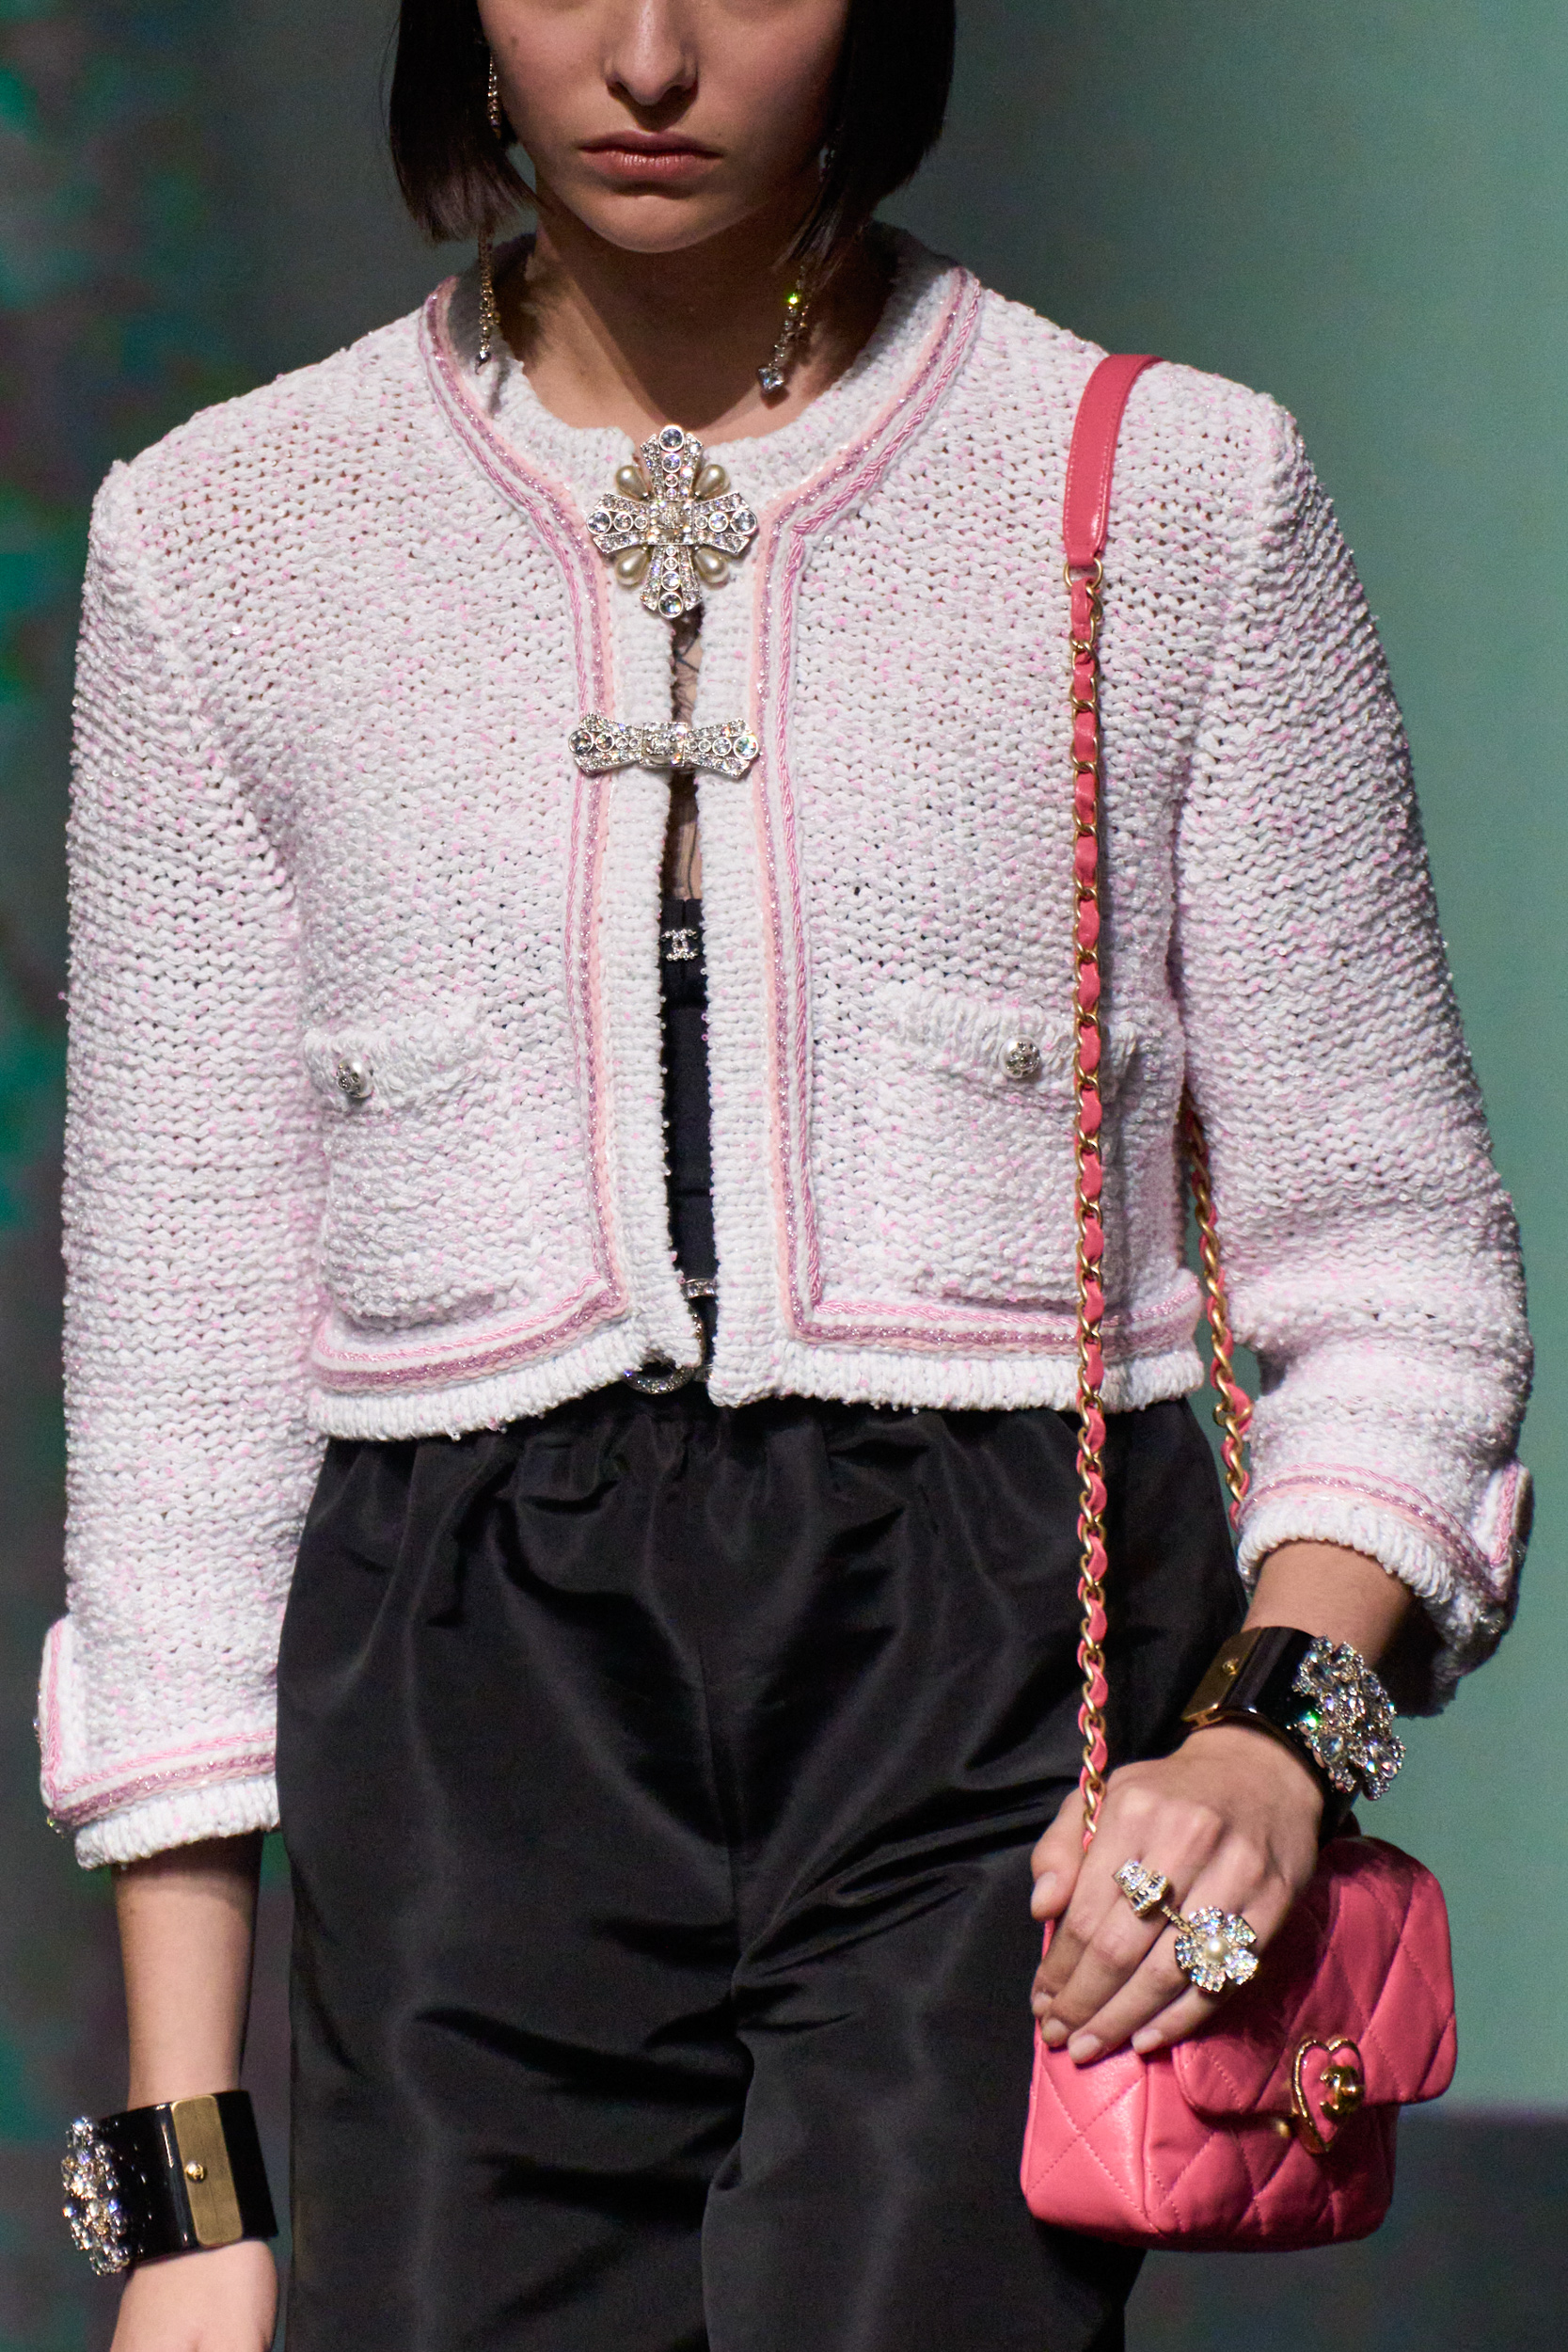 Chanel Spring 2023 Fashion Show Details